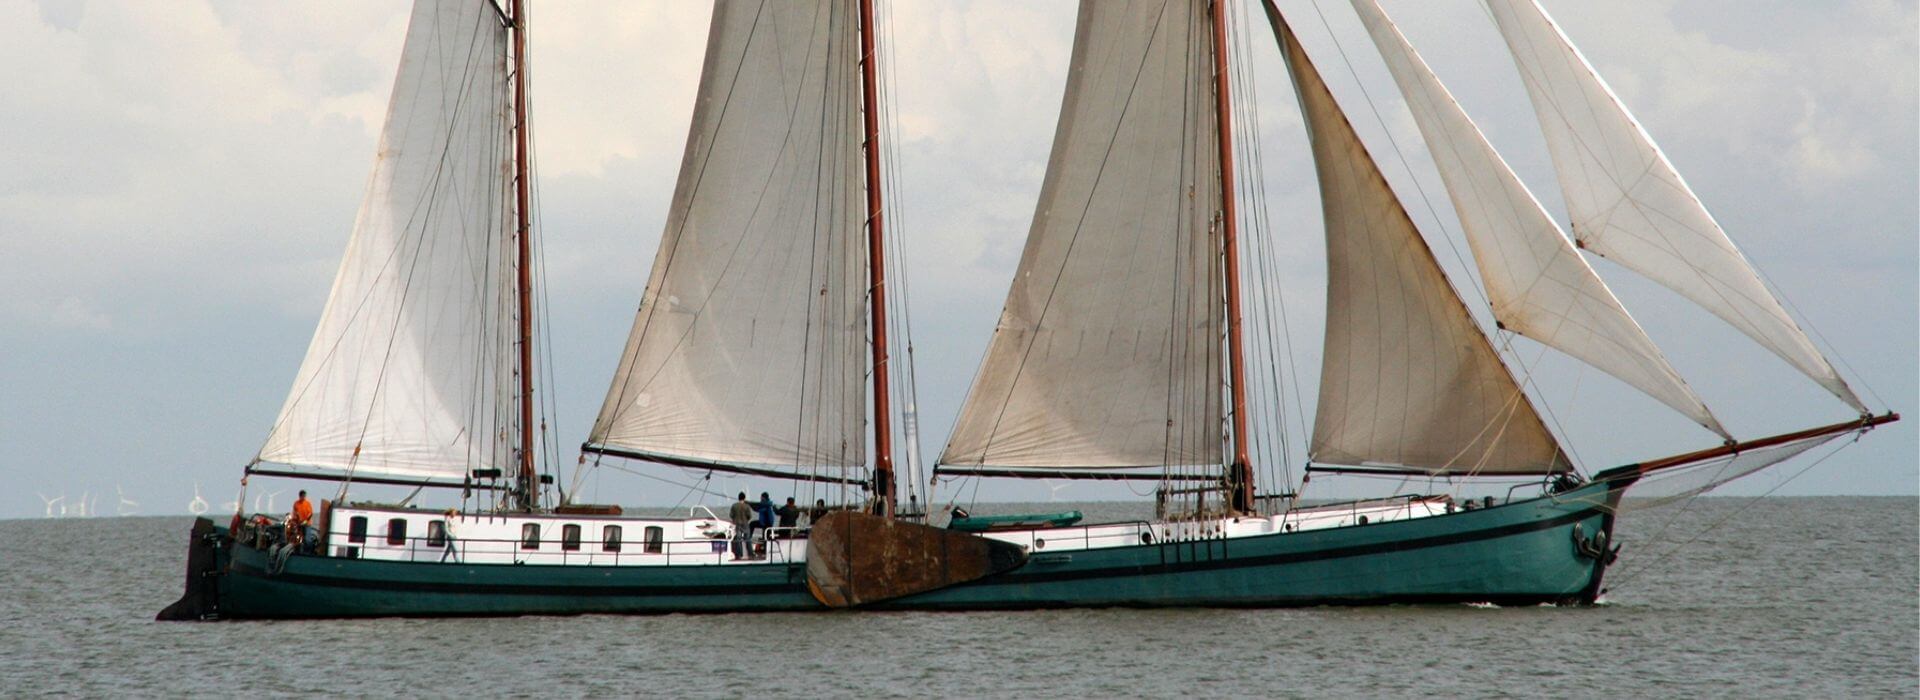 Sailing boat hire Ijsselmeer - book team event and excursion at bceed events